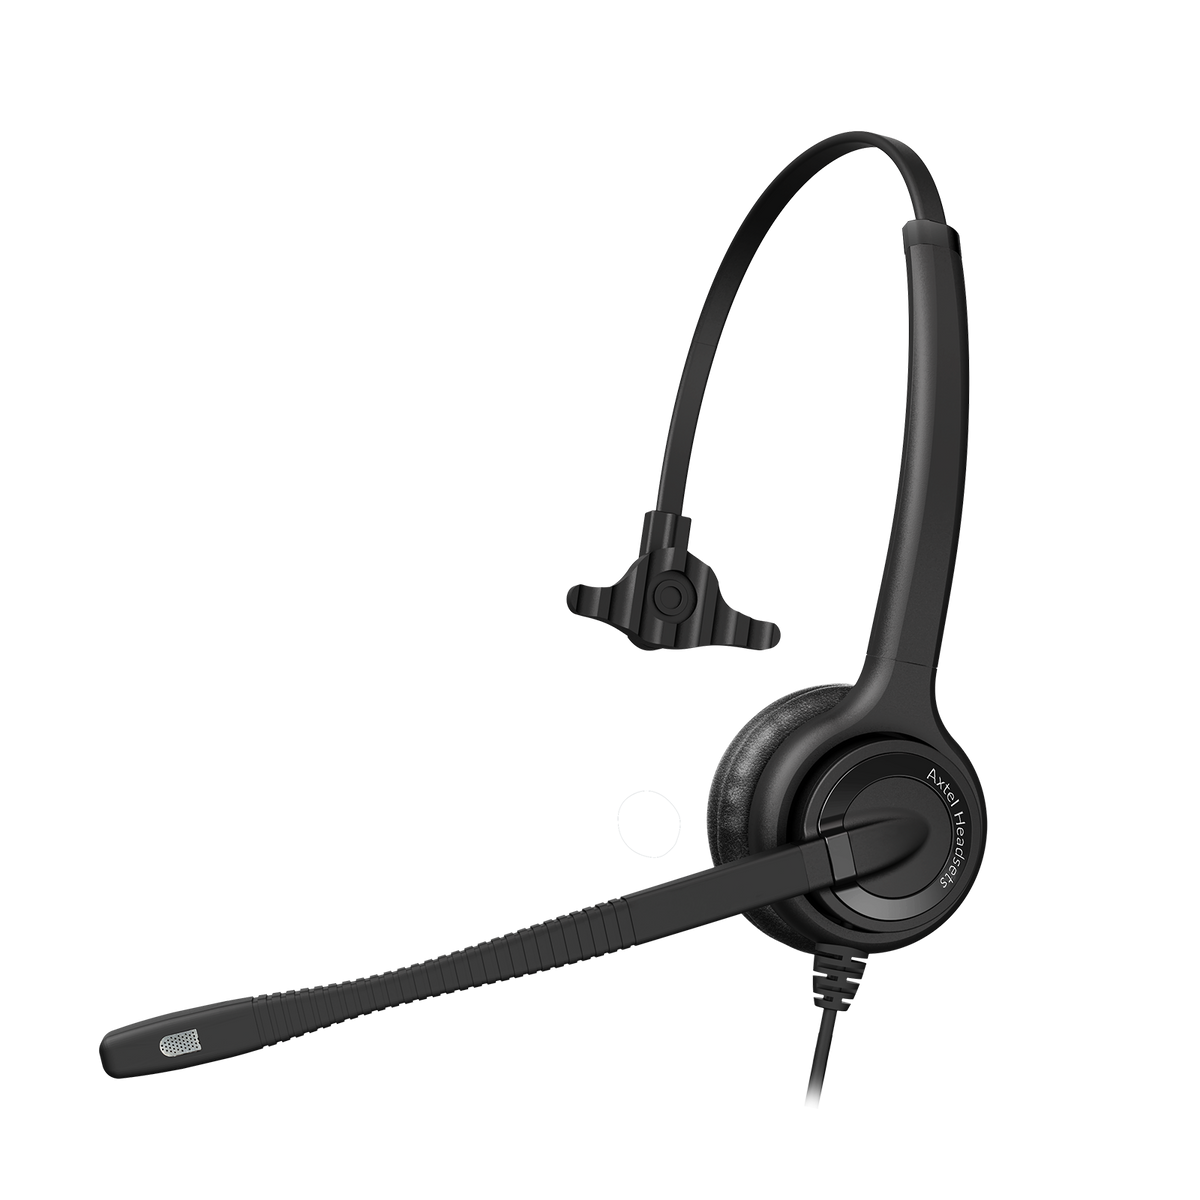 AXTEL-AXH-EHDMSM-HEADSET-SIDE-VIEW